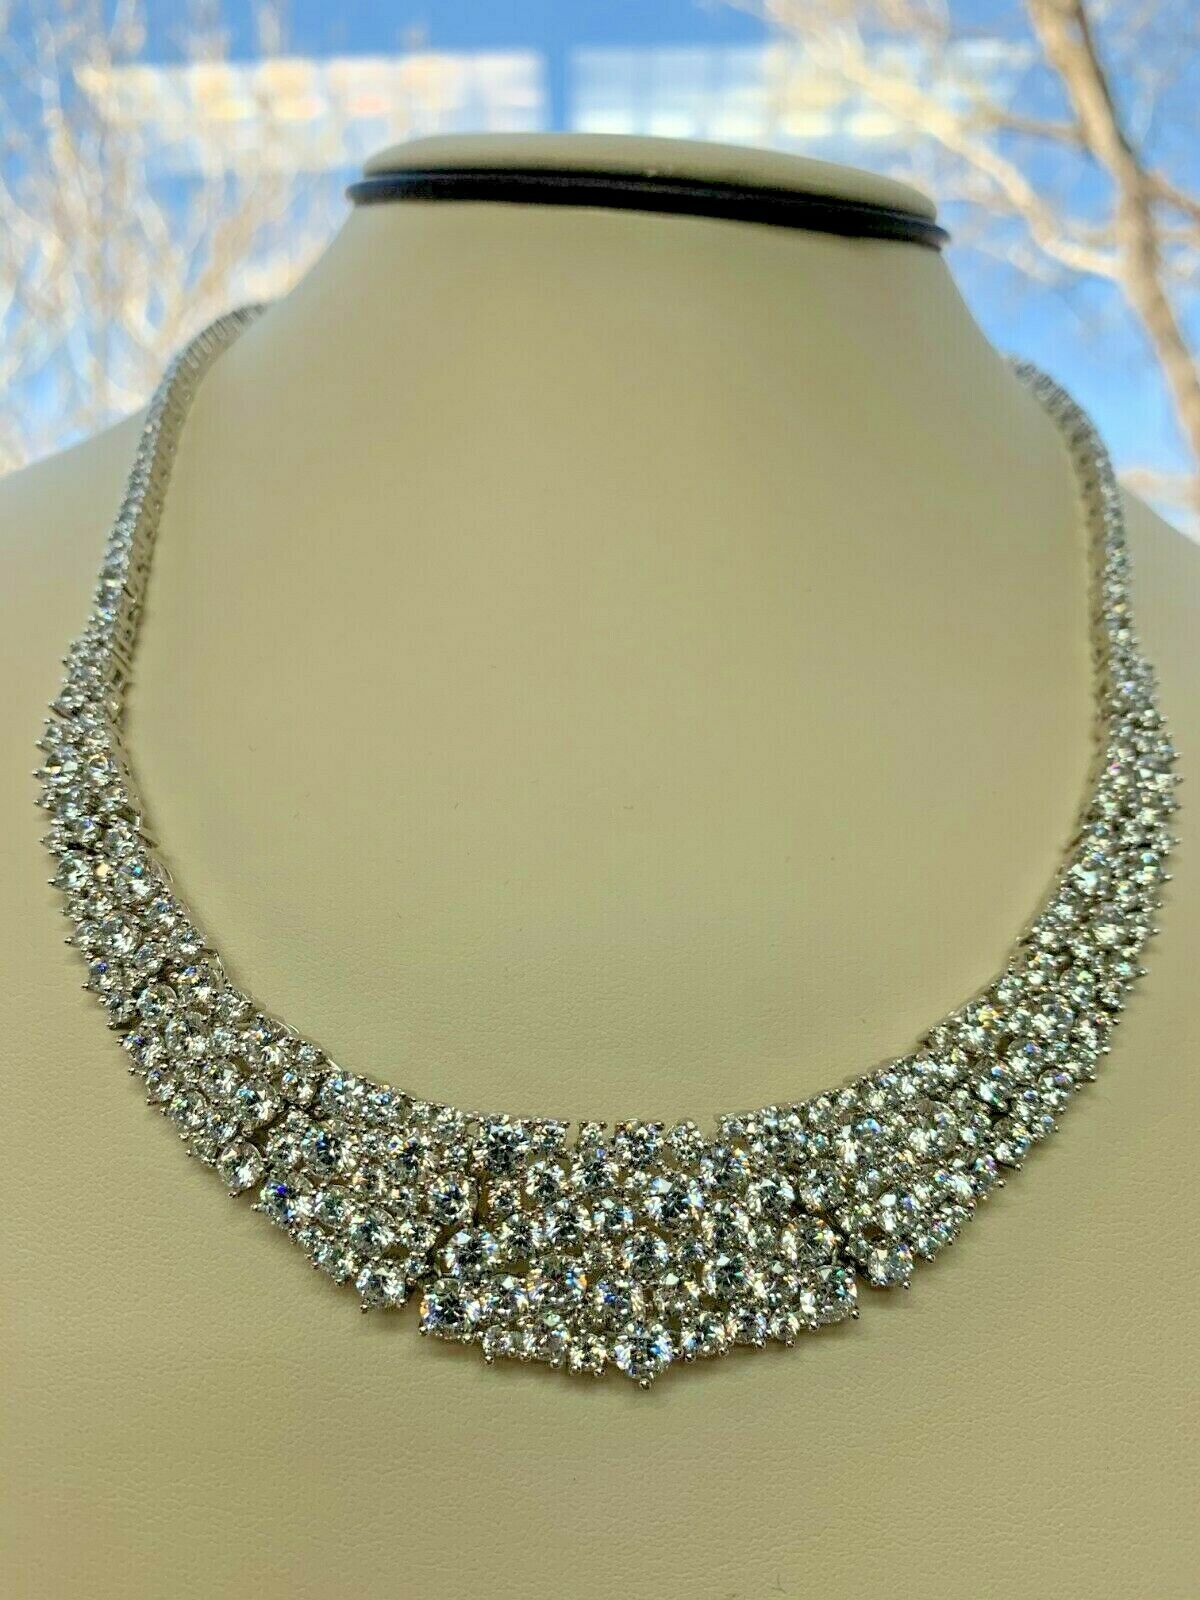 Absolute 18" Sterling Silver Cubic Zirconia Tapered Bib Necklace - HSN $600 | Jewelry & Watches:Fine Jewelry:Fine Necklaces & Pendants:Gemstone